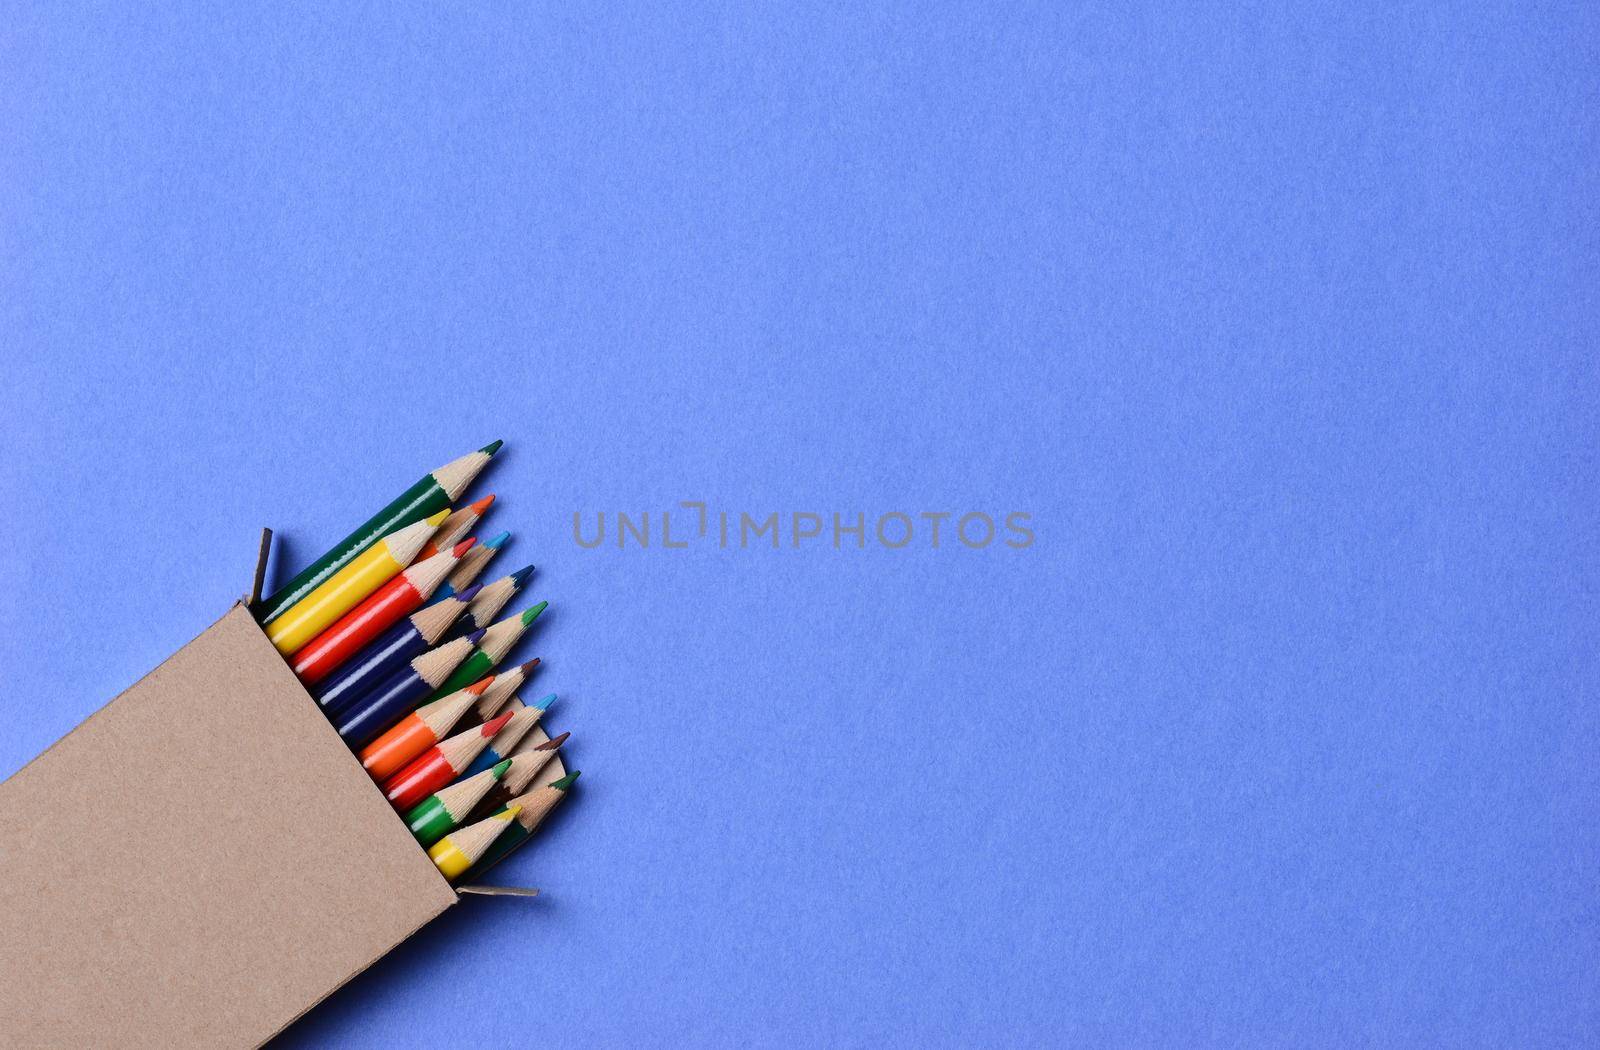 High angle shot of a box of multi-colored pencils on a blue background. The pencils are part way out of the box which is at an angle in the lower left corner leaving copy space.